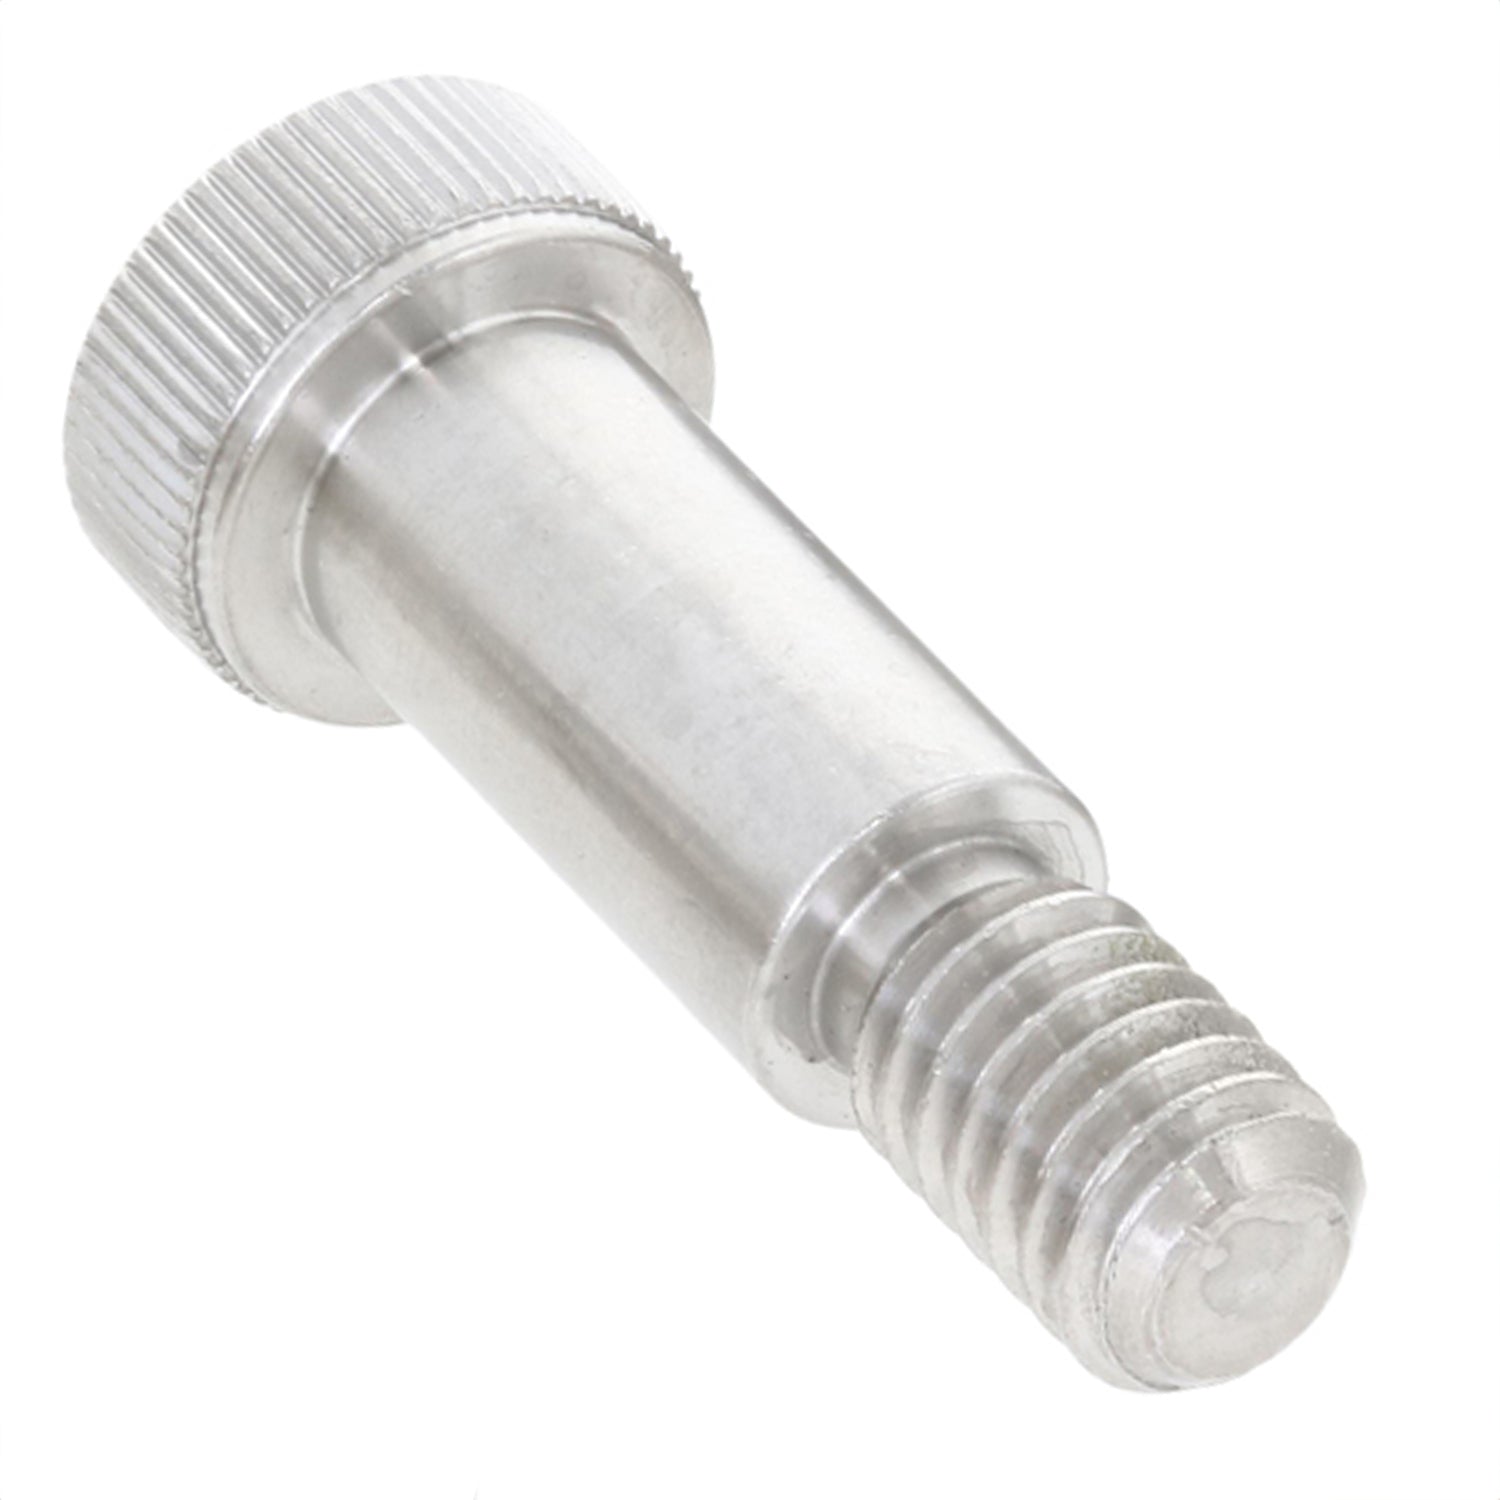 Stainless steel shoulder bolt with hex drive on white background. 